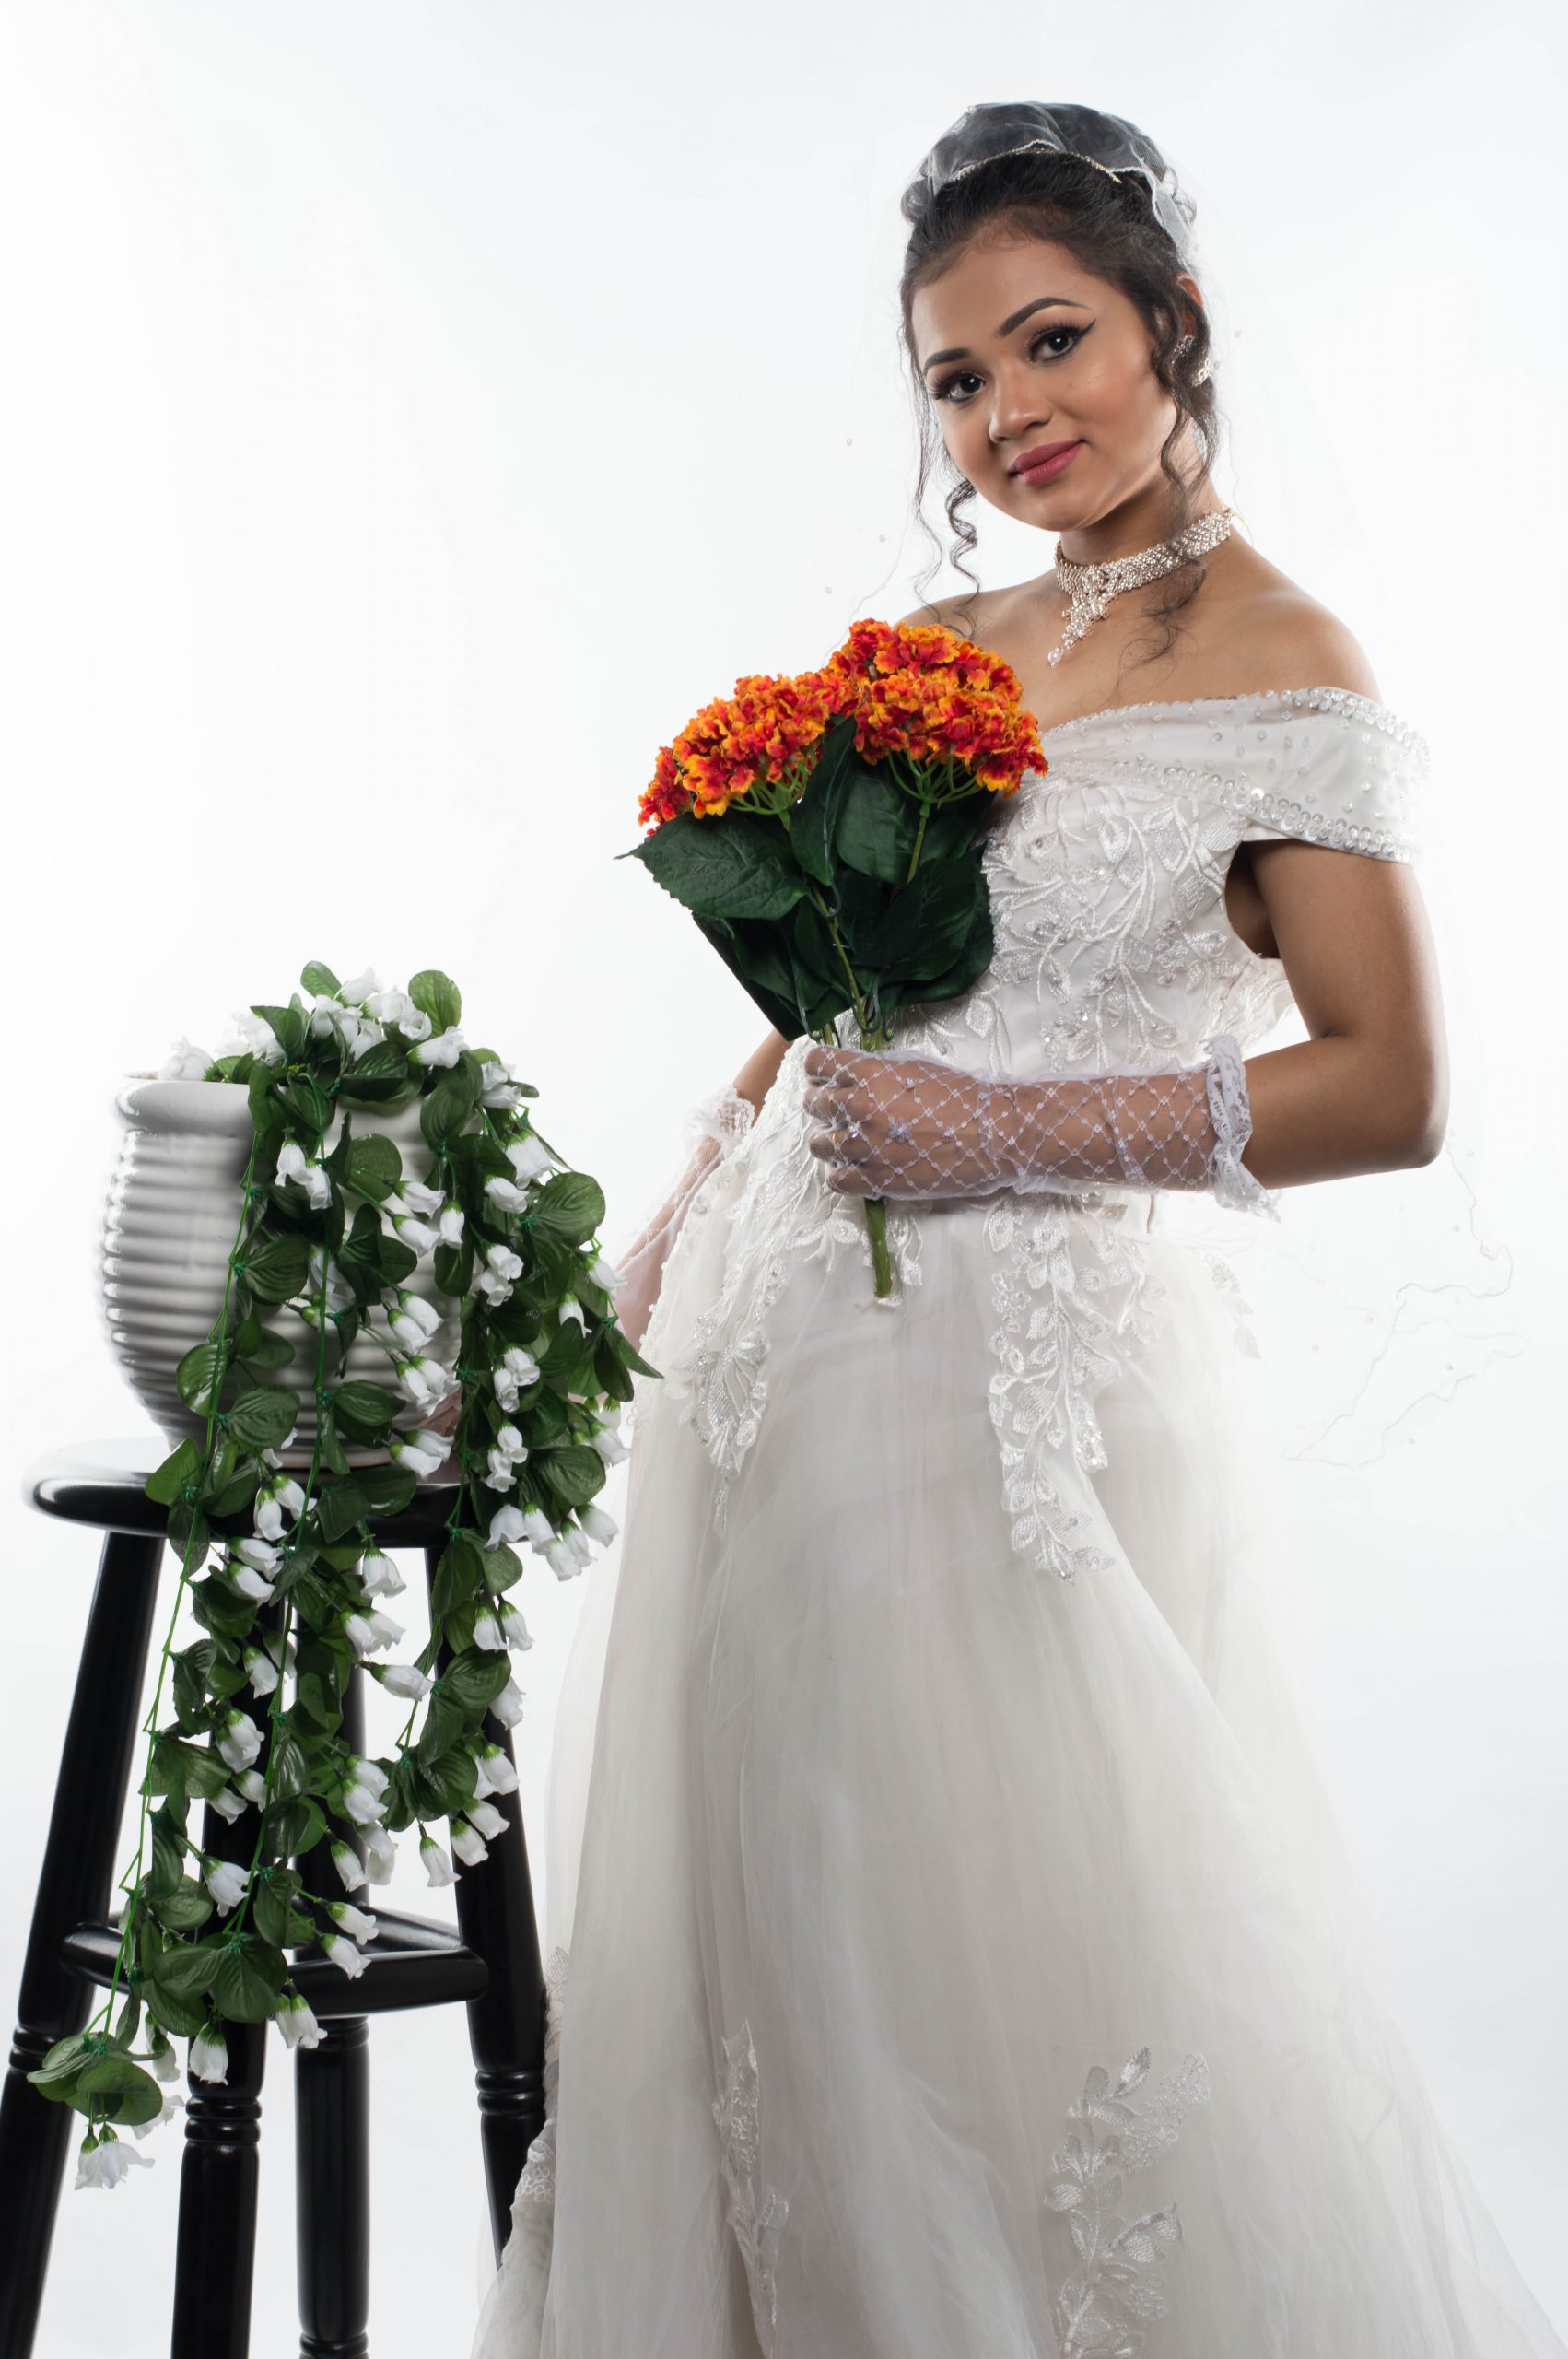 bride posing with a bouquet